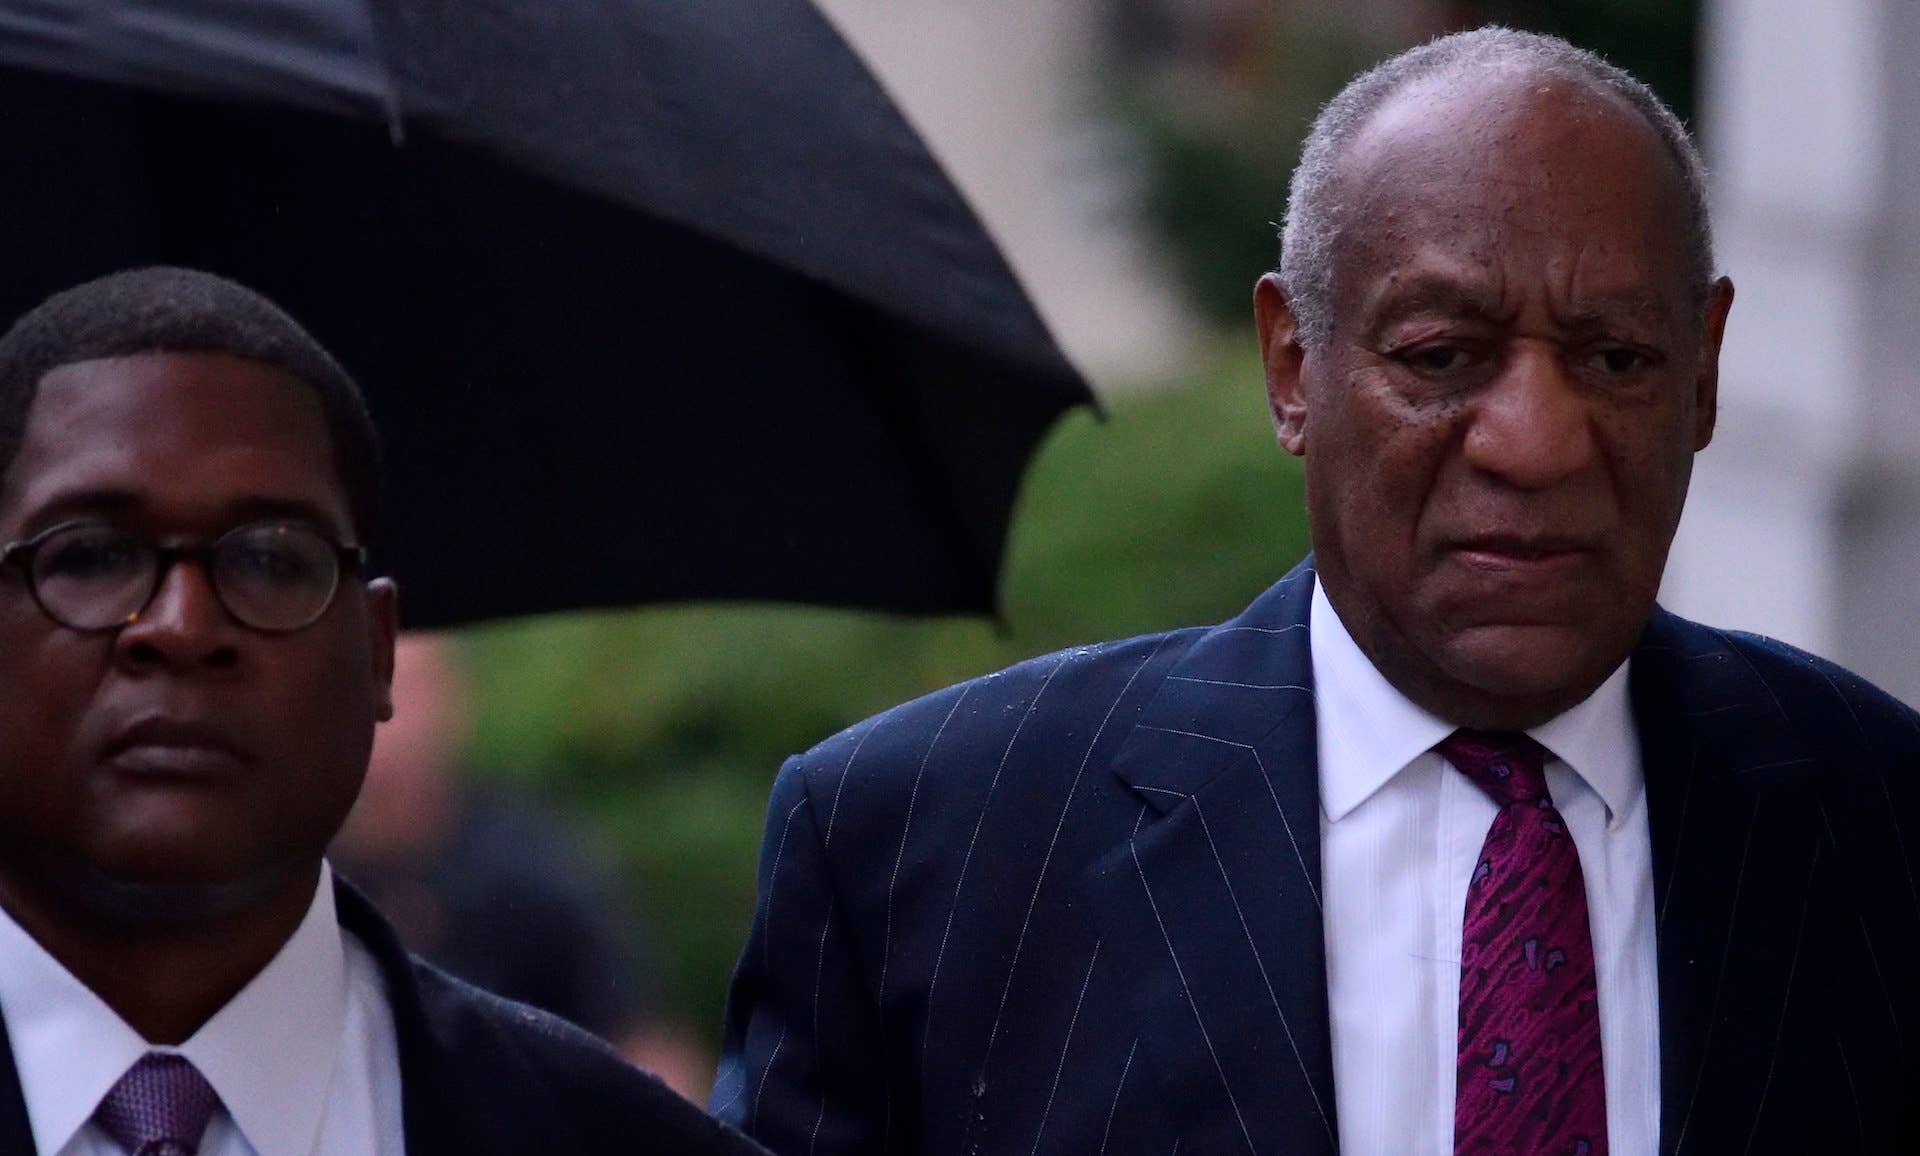 Bill Cosby attends court in 2018